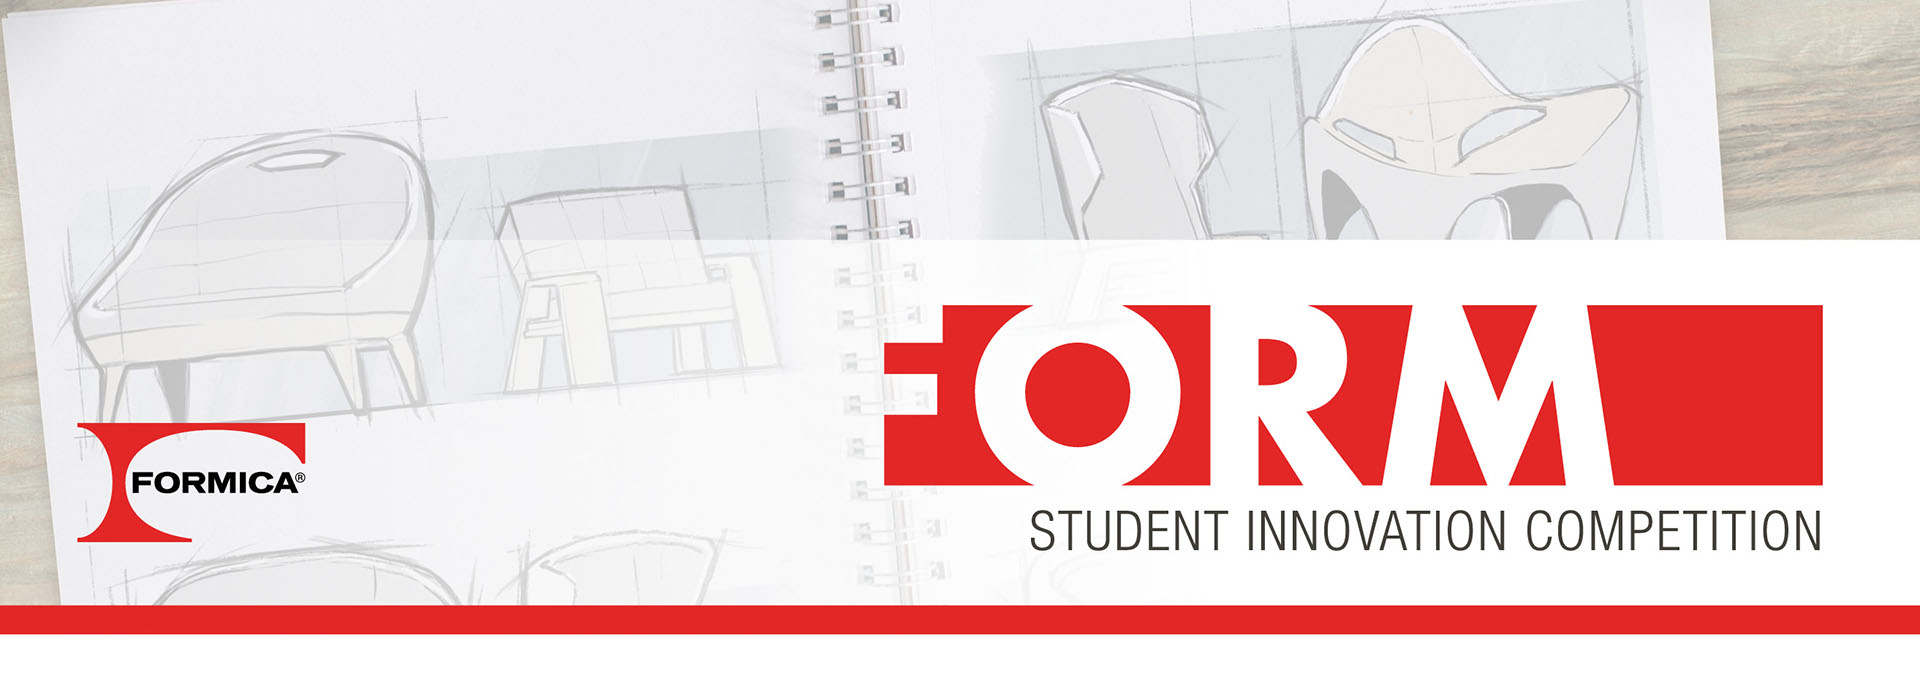 FORM Student Innovation Competition by Formica Group